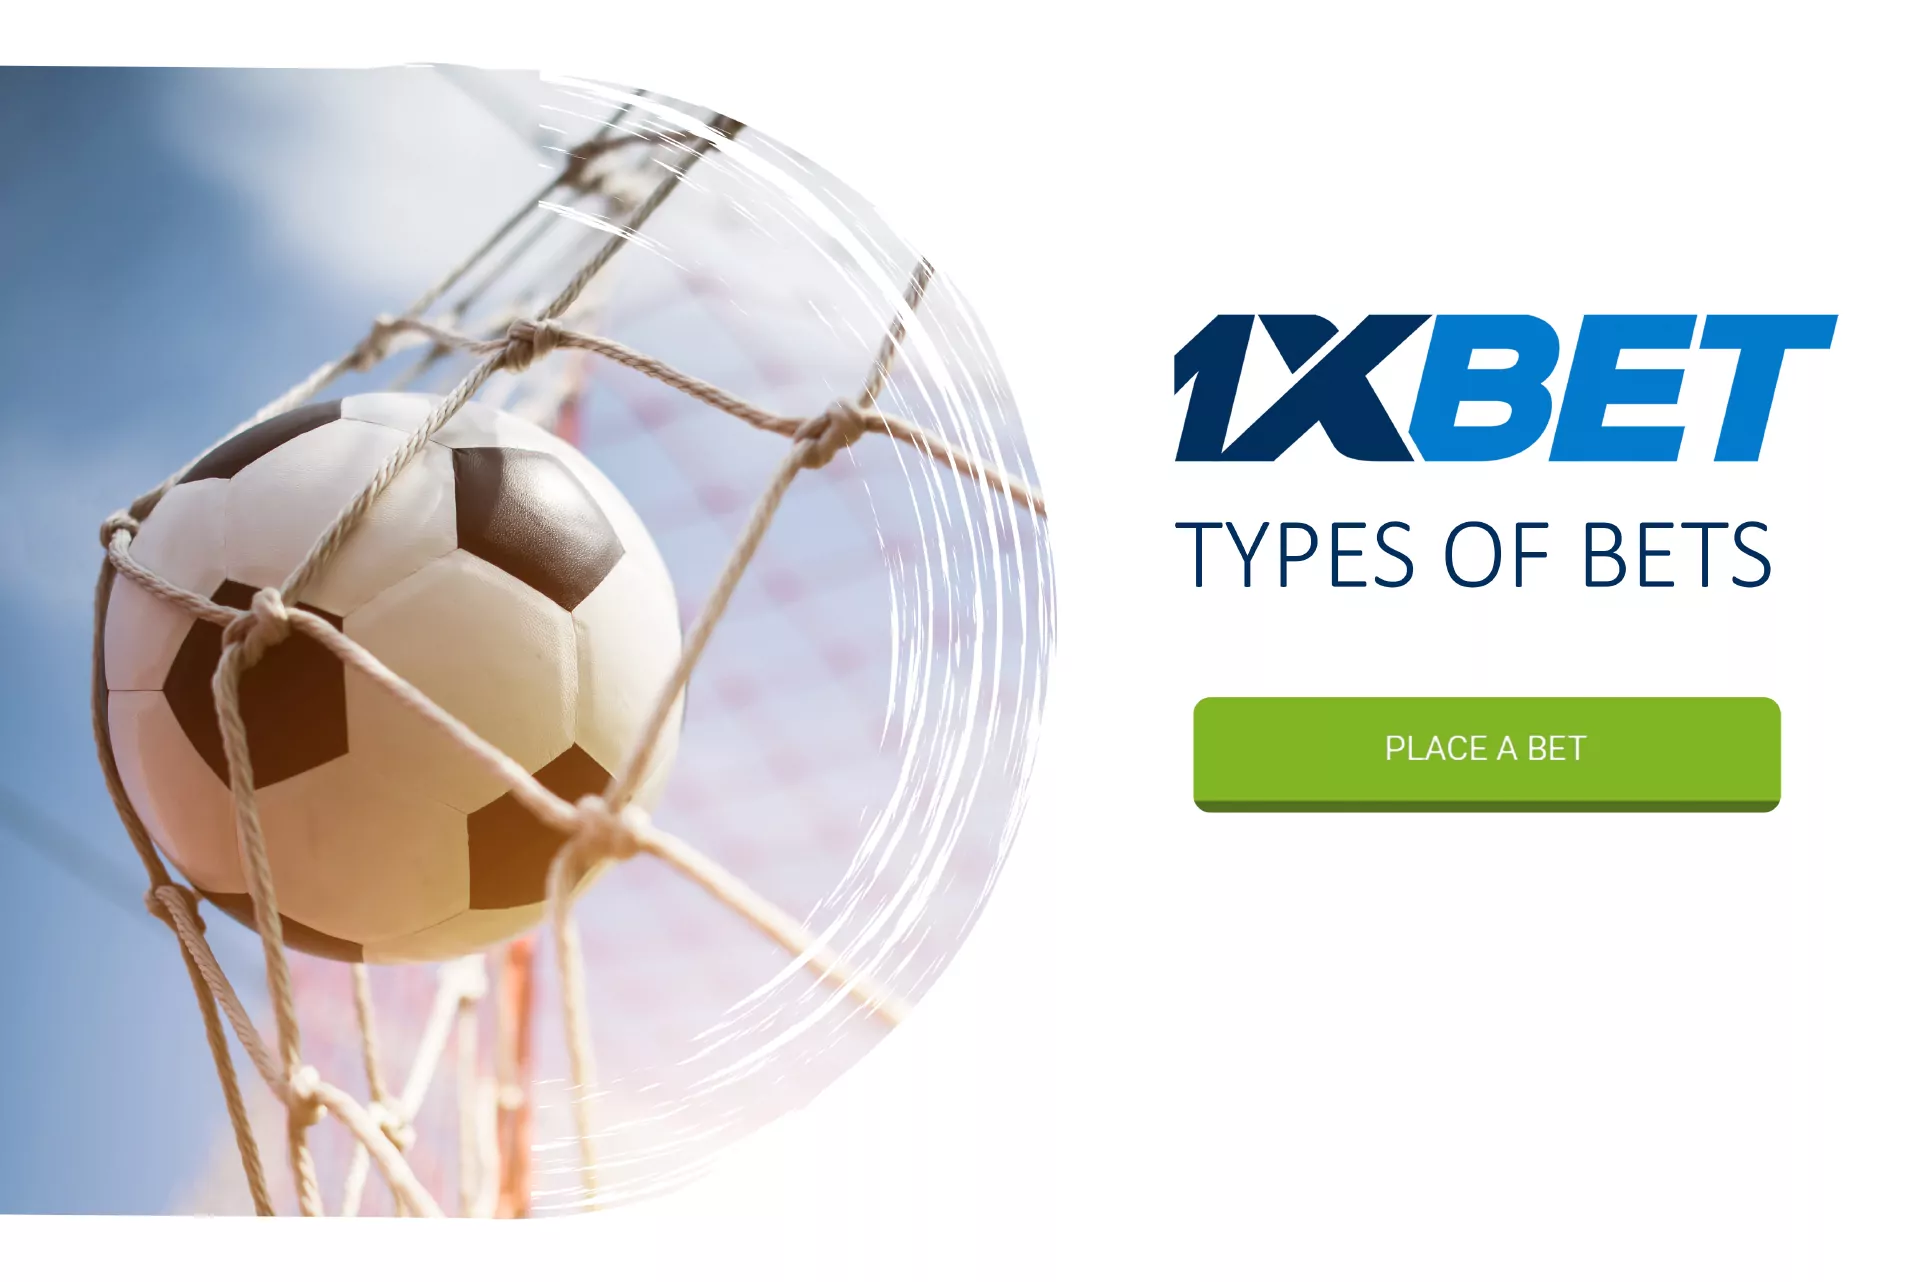 In the app 1xBet available different types of bets.